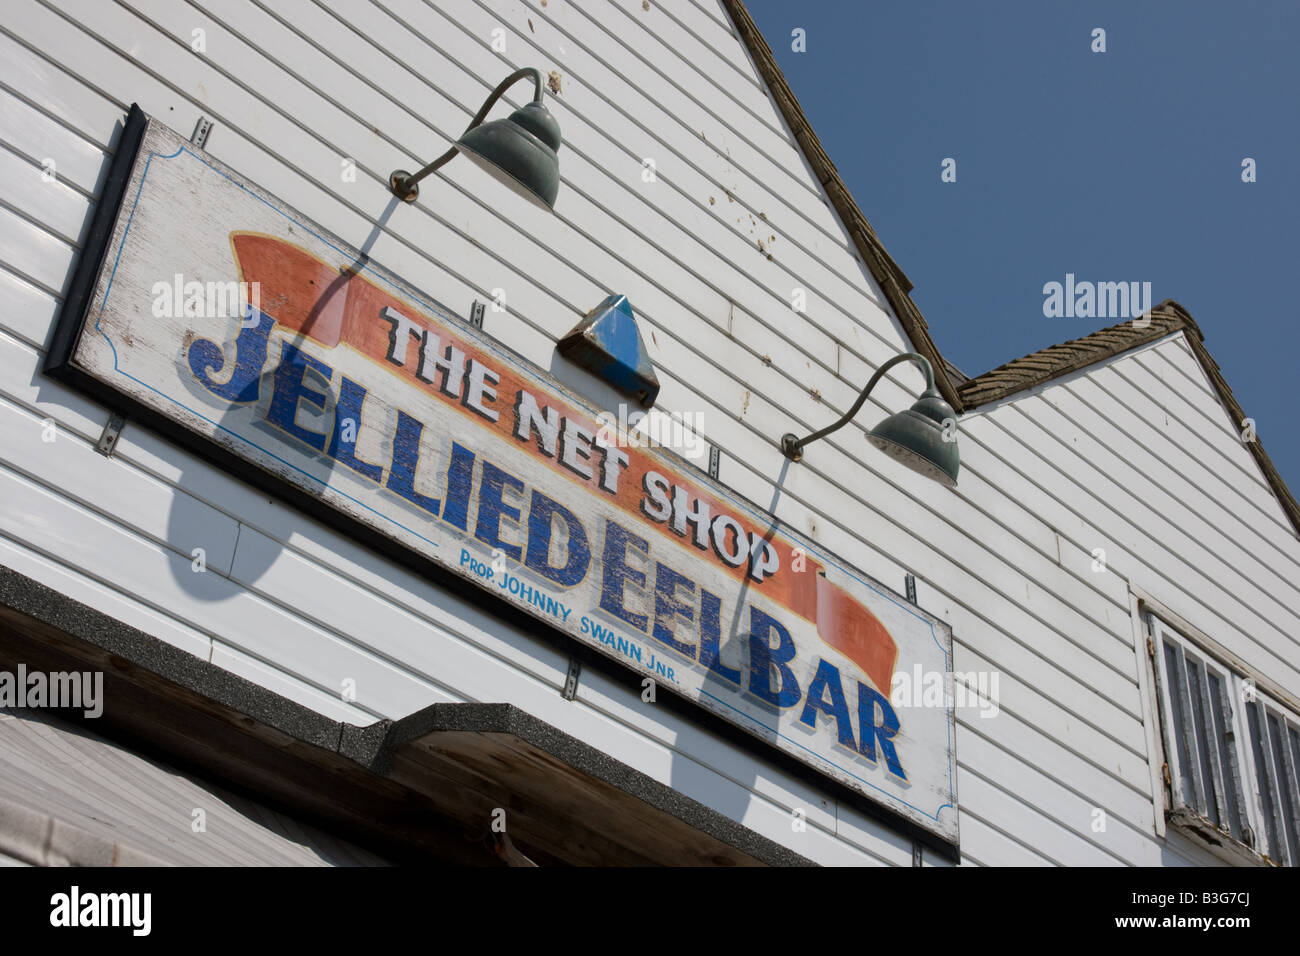 Jeelied Eel Bar sign on the side of a british seaside building Stock Photo